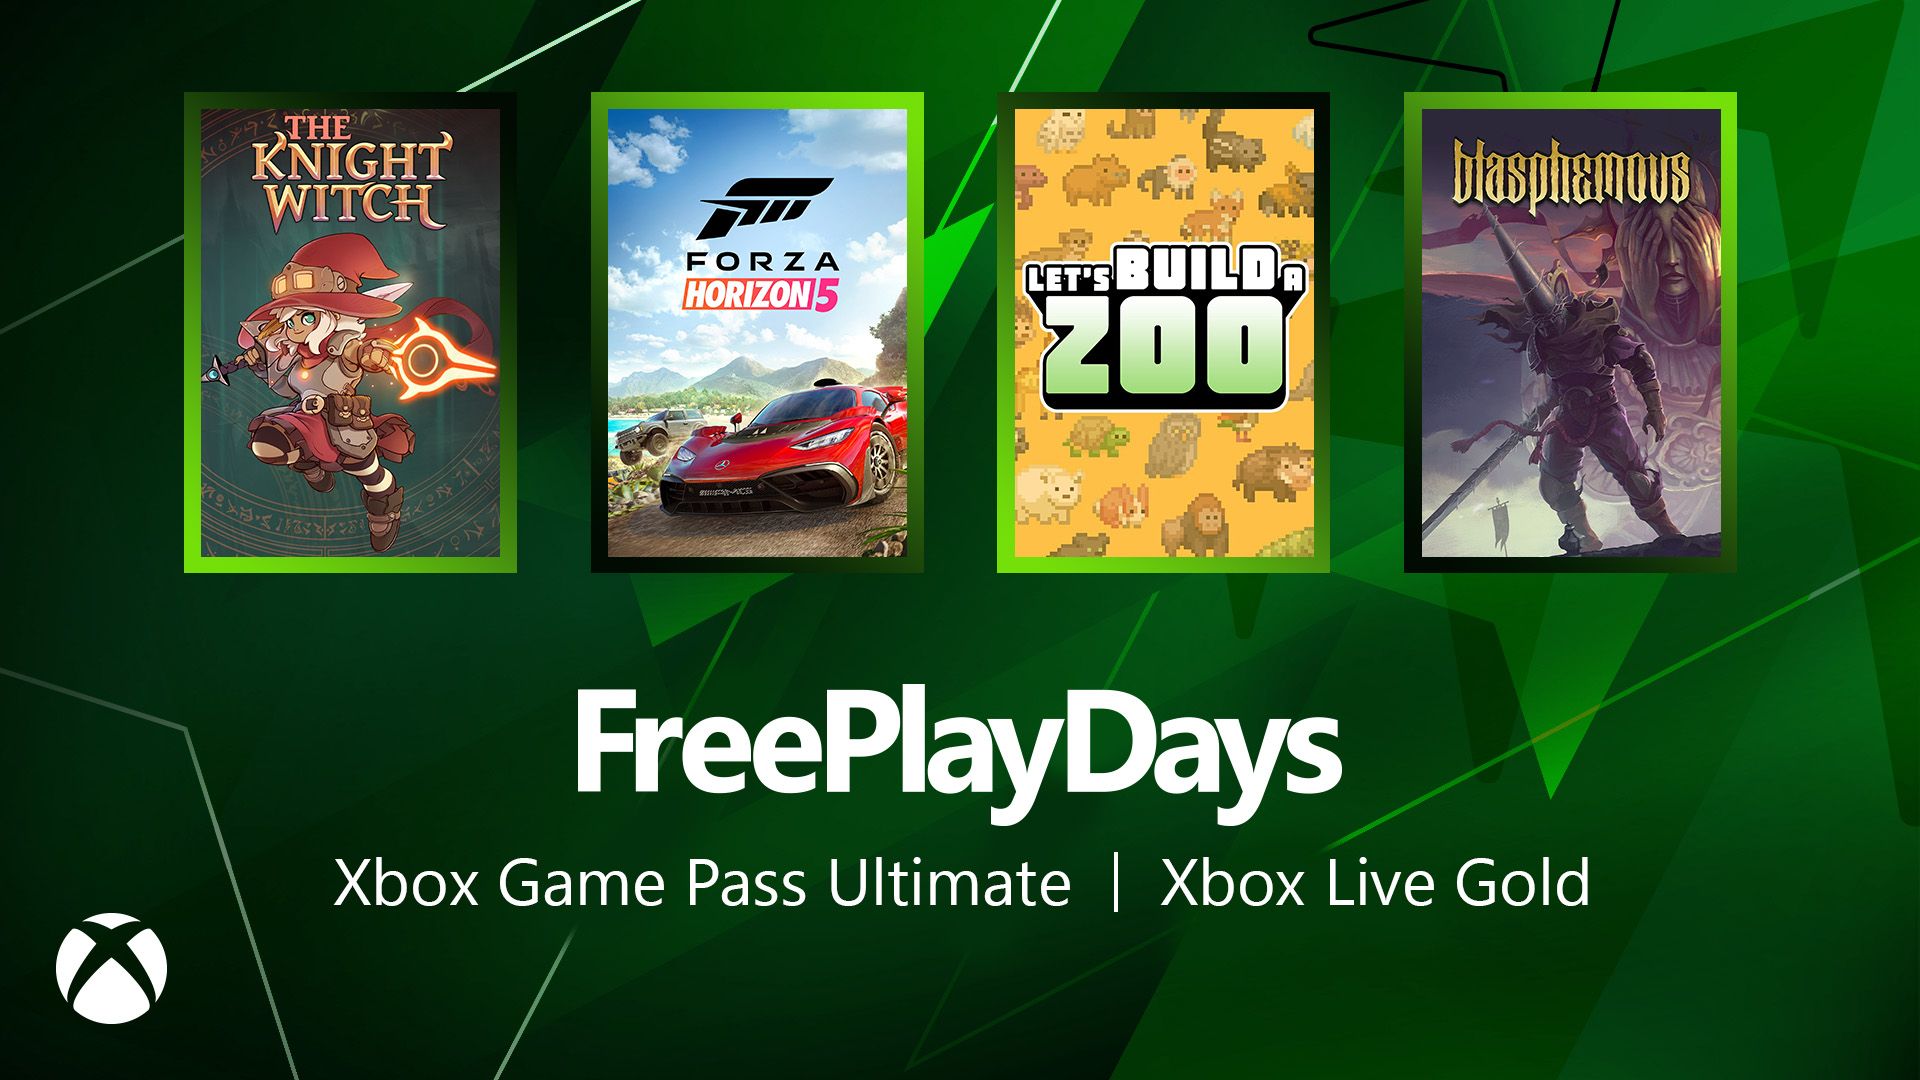 Free Play Days - August 17